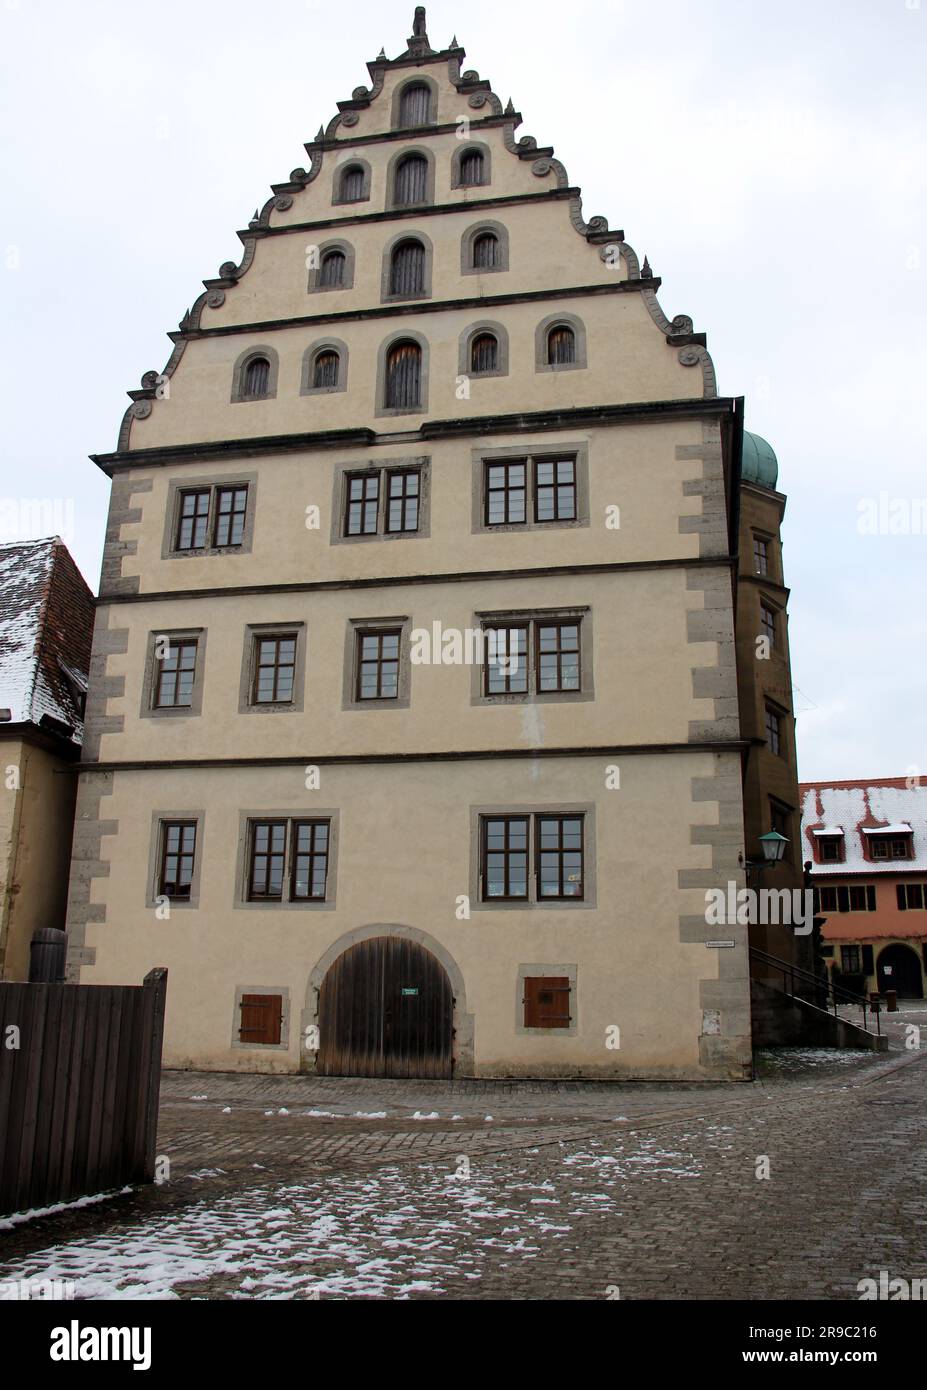 Renaissance building of the Old Gymnasium,built in 1589, side elevation with the stepped gable of the roof, Rothenburg ob der Tauber, Germany Stock Photo